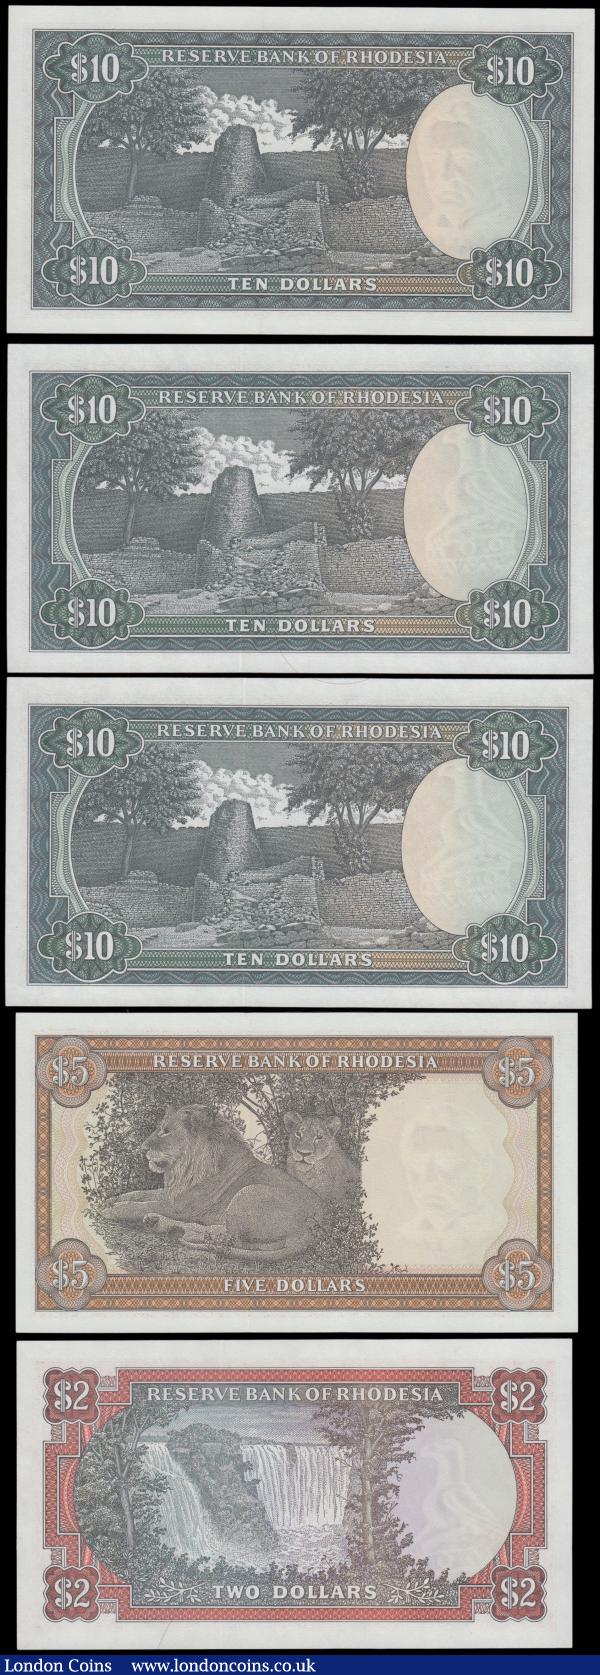 Rhodesia Reserve Bank (5), 10 Dollars (3) dated 1979 & 1976 including a pair of consecutively numbered notes series J/62 575512 & J/62 575513, 5 Dollars dated 1978 and 2 Dollars dated 1979, Uncirculated : World Banknotes : Auction 161 : Lot 412